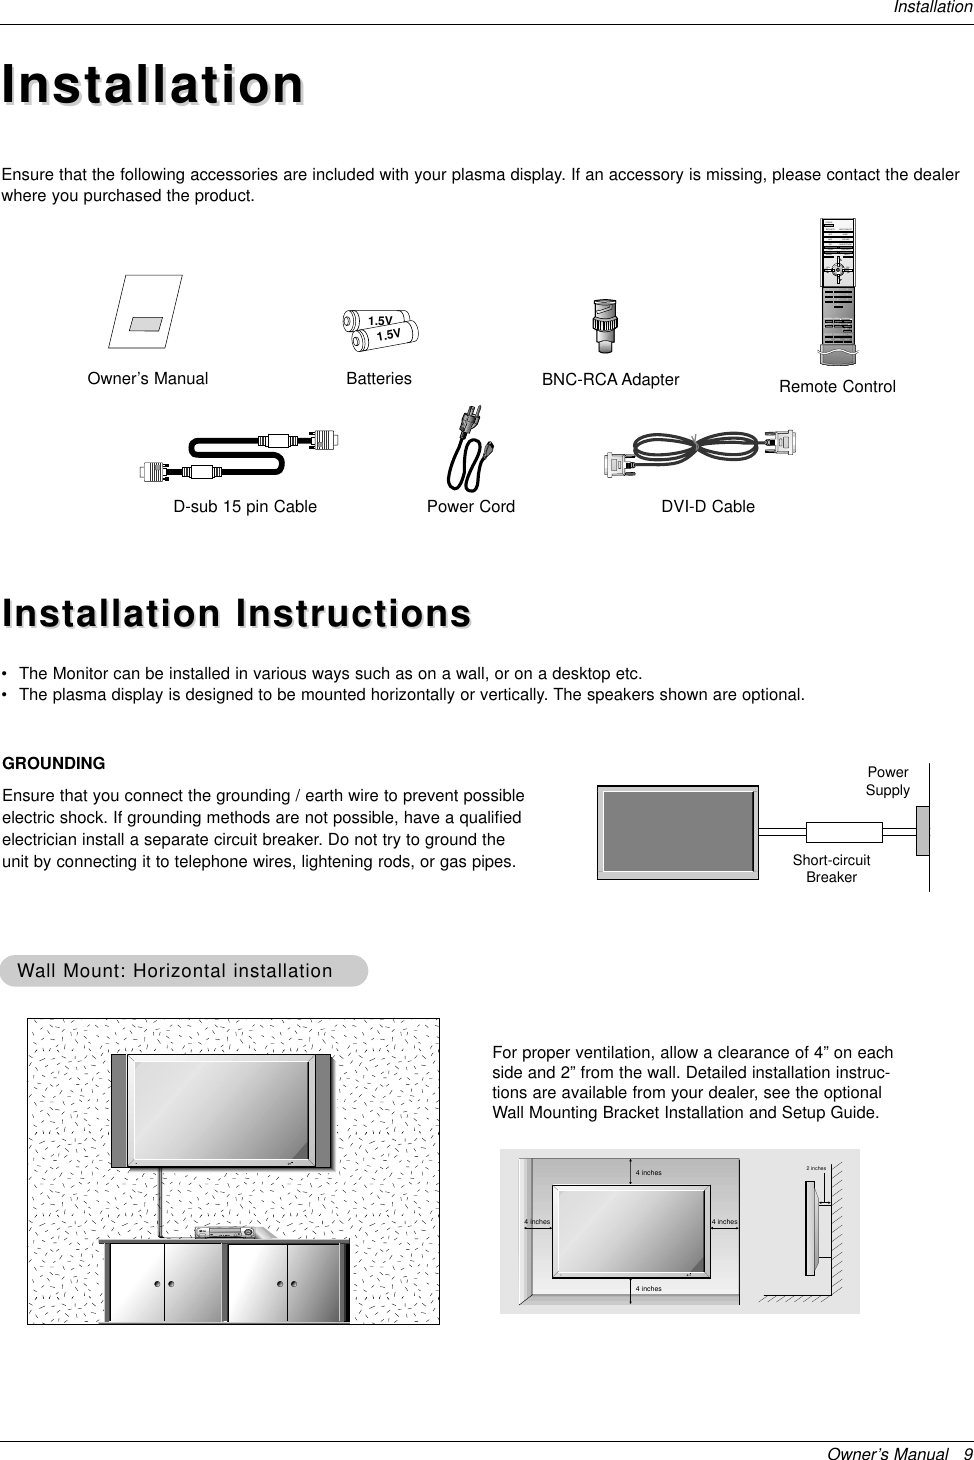 Owner’s Manual   9InstallationInstallationInstallationD-sub 15 pin CableOwner’s Manual1.5V1.5VBatteries BNC-RCA AdapterPower Cord1234567809POWERSECURITY INPUT SELECTAPC DASPARC PIP ARCPIPTWIN PICTURESWAPMENU MUTEOKVOLPOWER STOPPLAY FFRECREWP/STILLWIN.SIZEWIN.POSITIONZOOM + SLEEPZOOM -SPLIT ZOOMVOLSUB INPUTRemote ControlDVI-D CableEnsure that the following accessories are included with your plasma display. If an accessory is missing, please contact the dealerwhere you purchased the product.Installation InstructionsInstallation Instructions•The Monitor can be installed in various ways such as on a wall, or on a desktop etc.•The plasma display is designed to be mounted horizontally or vertically. The speakers shown are optional.GROUNDINGEnsure that you connect the grounding / earth wire to prevent possibleelectric shock. If grounding methods are not possible, have a qualifiedelectrician install a separate circuit breaker. Do not try to ground theunit by connecting it to telephone wires, lightening rods, or gas pipes.PowerSupplyShort-circuitBreaker4 inches4 inches4 inches4 inches2 inchesWWall Mount: Horizontal installationall Mount: Horizontal installationFor proper ventilation, allow a clearance of 4” on eachside and 2” from the wall. Detailed installation instruc-tions are available from your dealer, see the optionalWall Mounting Bracket Installation and Setup Guide.